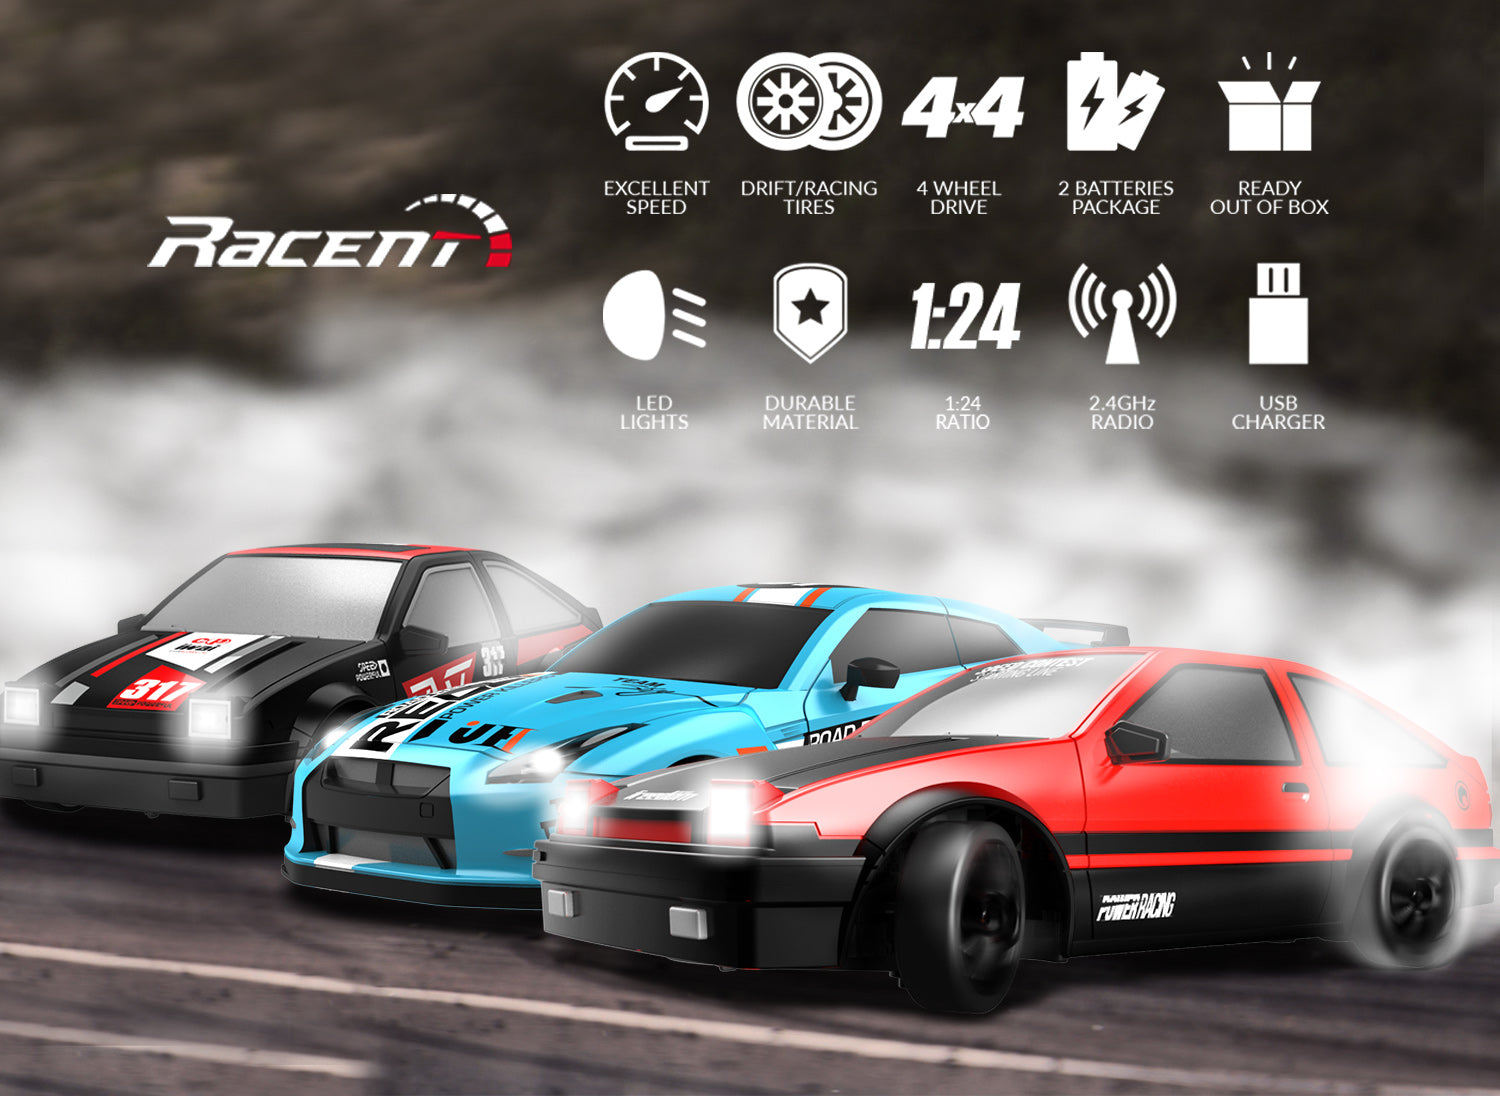 RACENT Thrill Rider: 1:24 4WD, 10MPH, LED, Racing/Drift